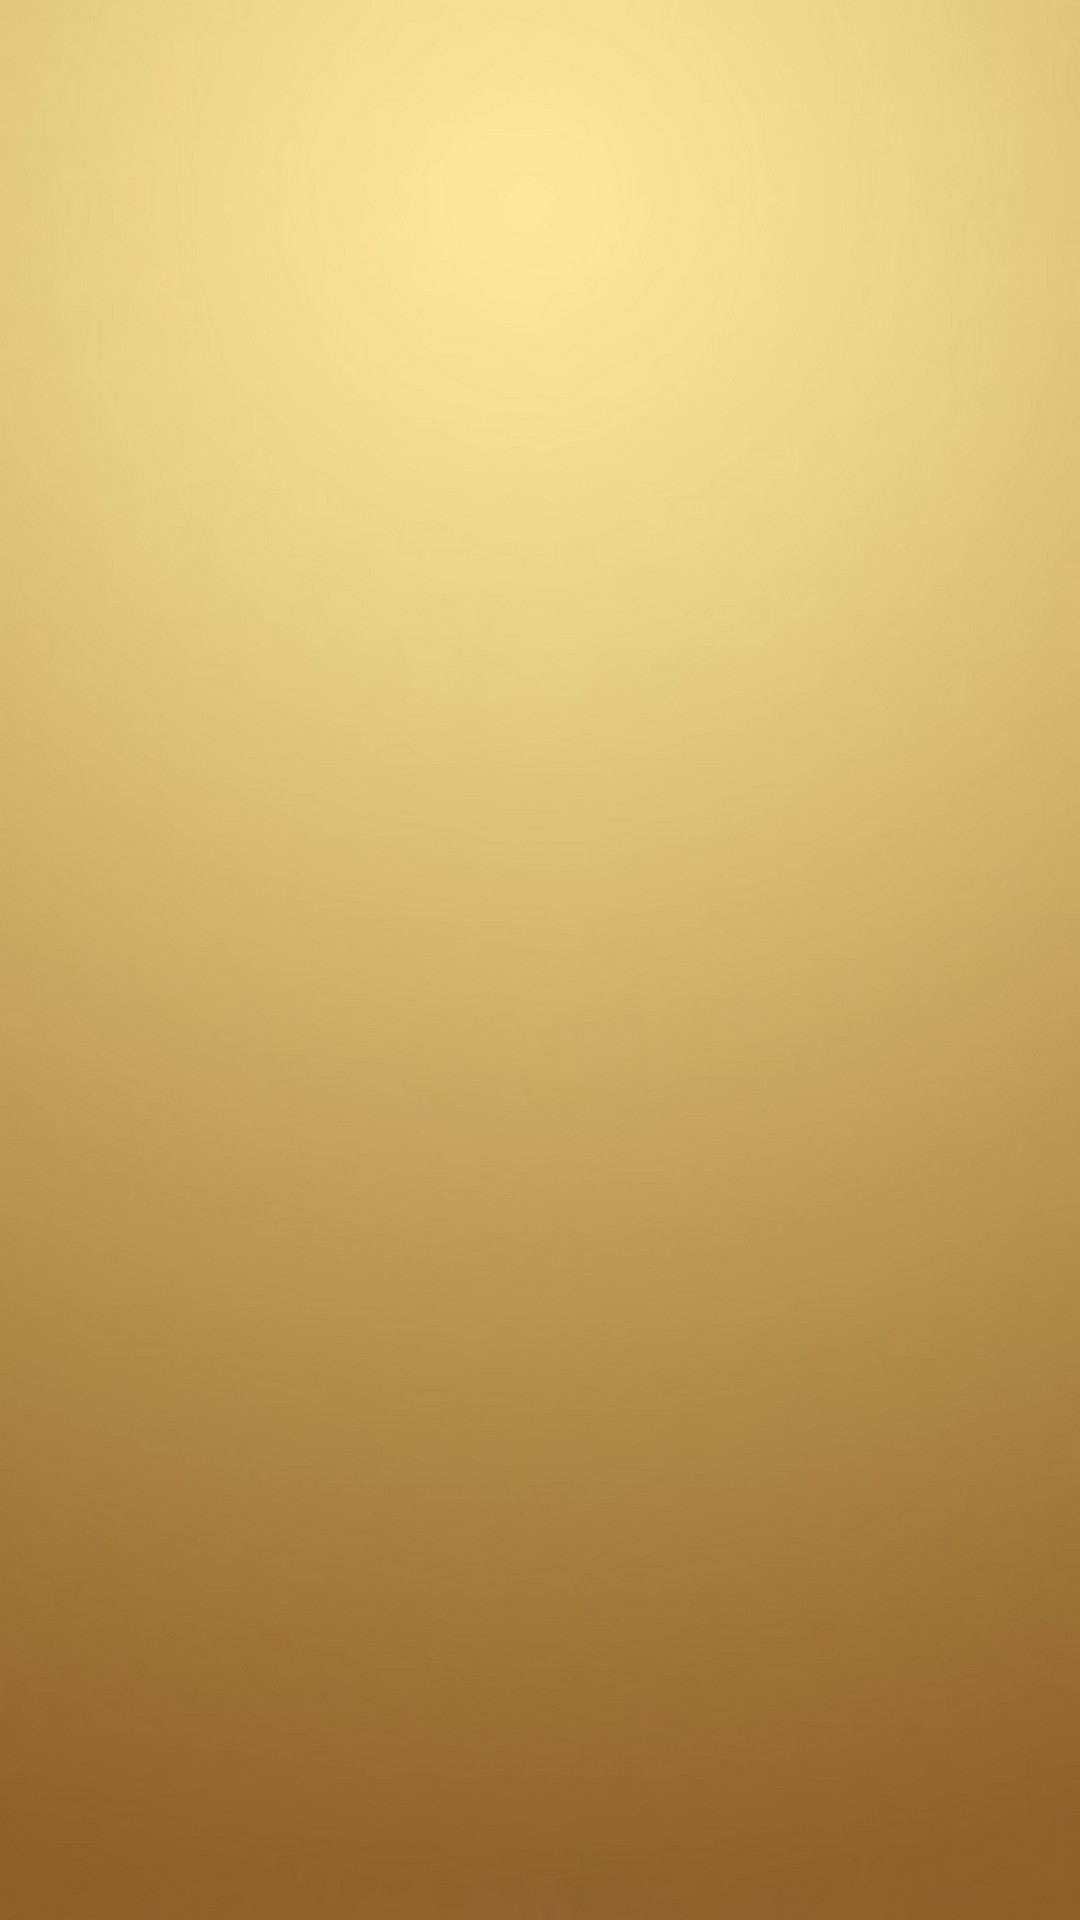 Plain Gold Wallpaper For iPhone with HD Resolution 1080X1920